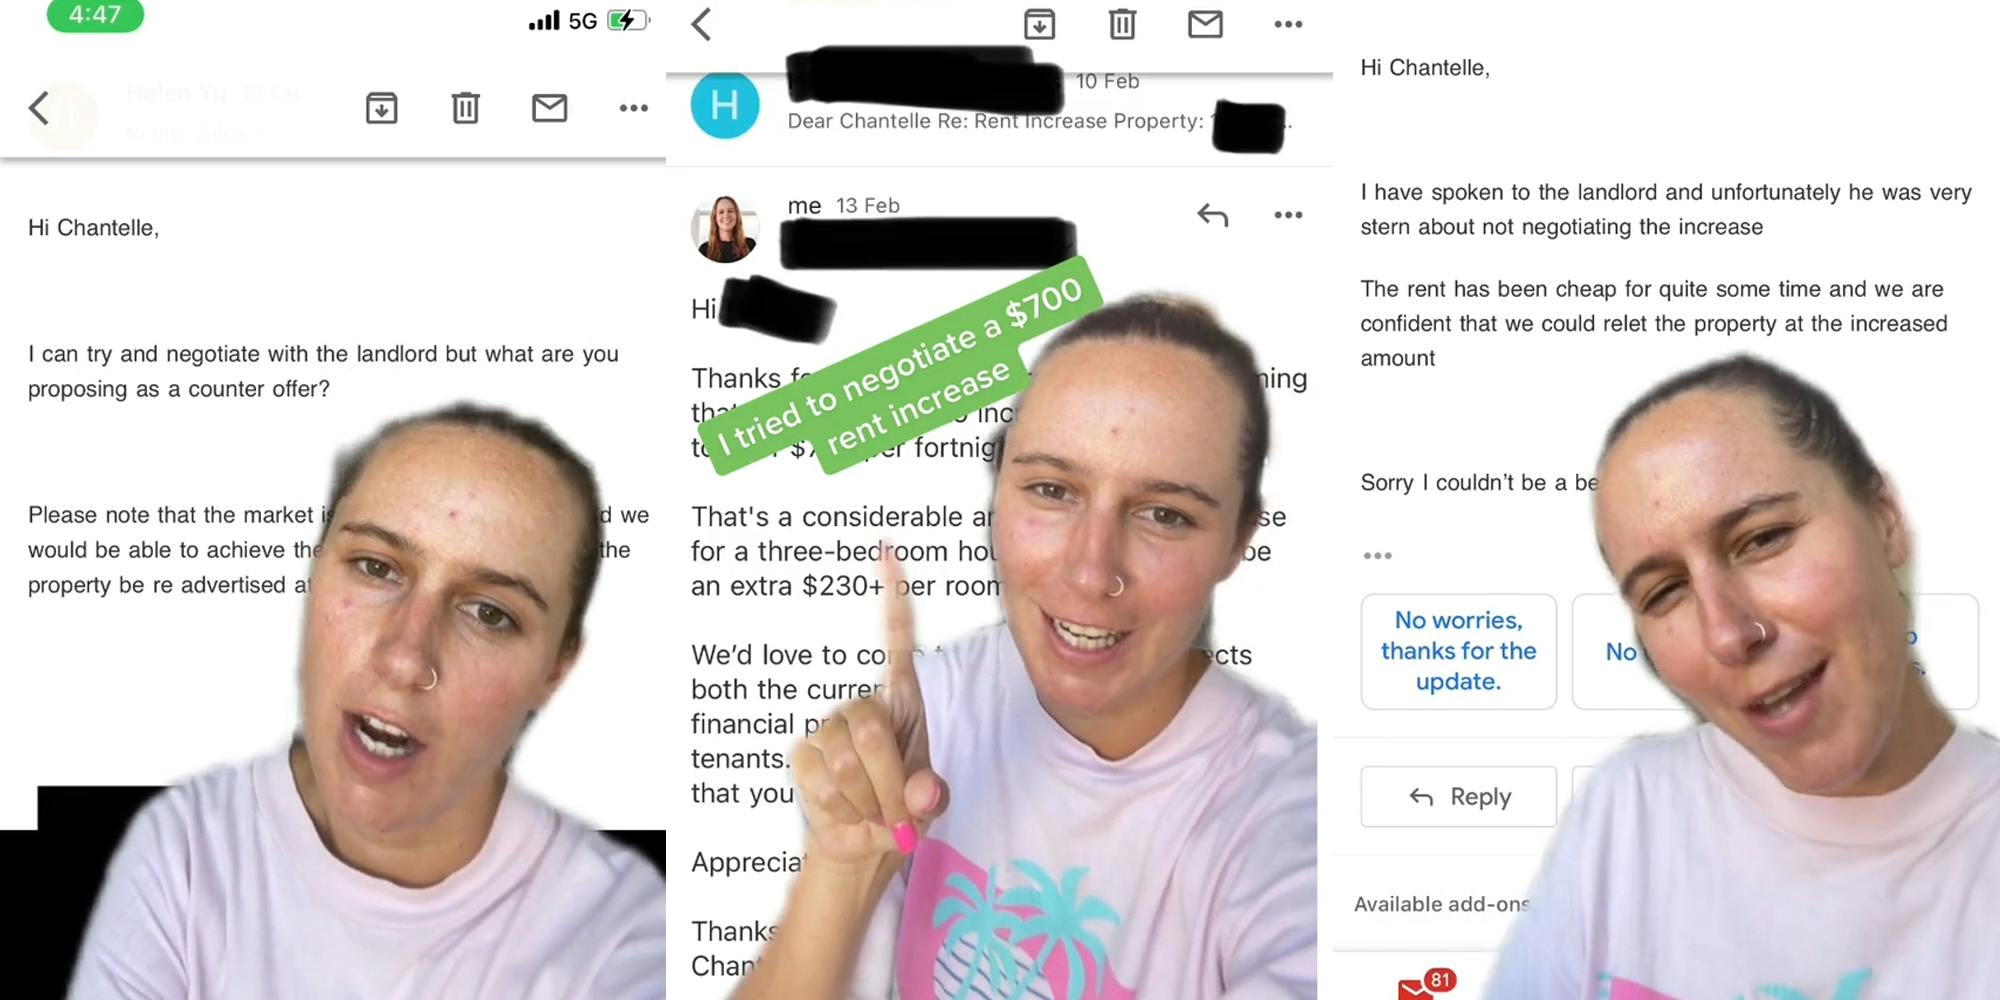 person greenscreen TikTok over email between real estate agent (l) person greenscreen TikTok over email between real estate agent with caption "I tried to negotiate a $700 rent increase" (c) person greenscreen TikTok over email between real estate agent (r)